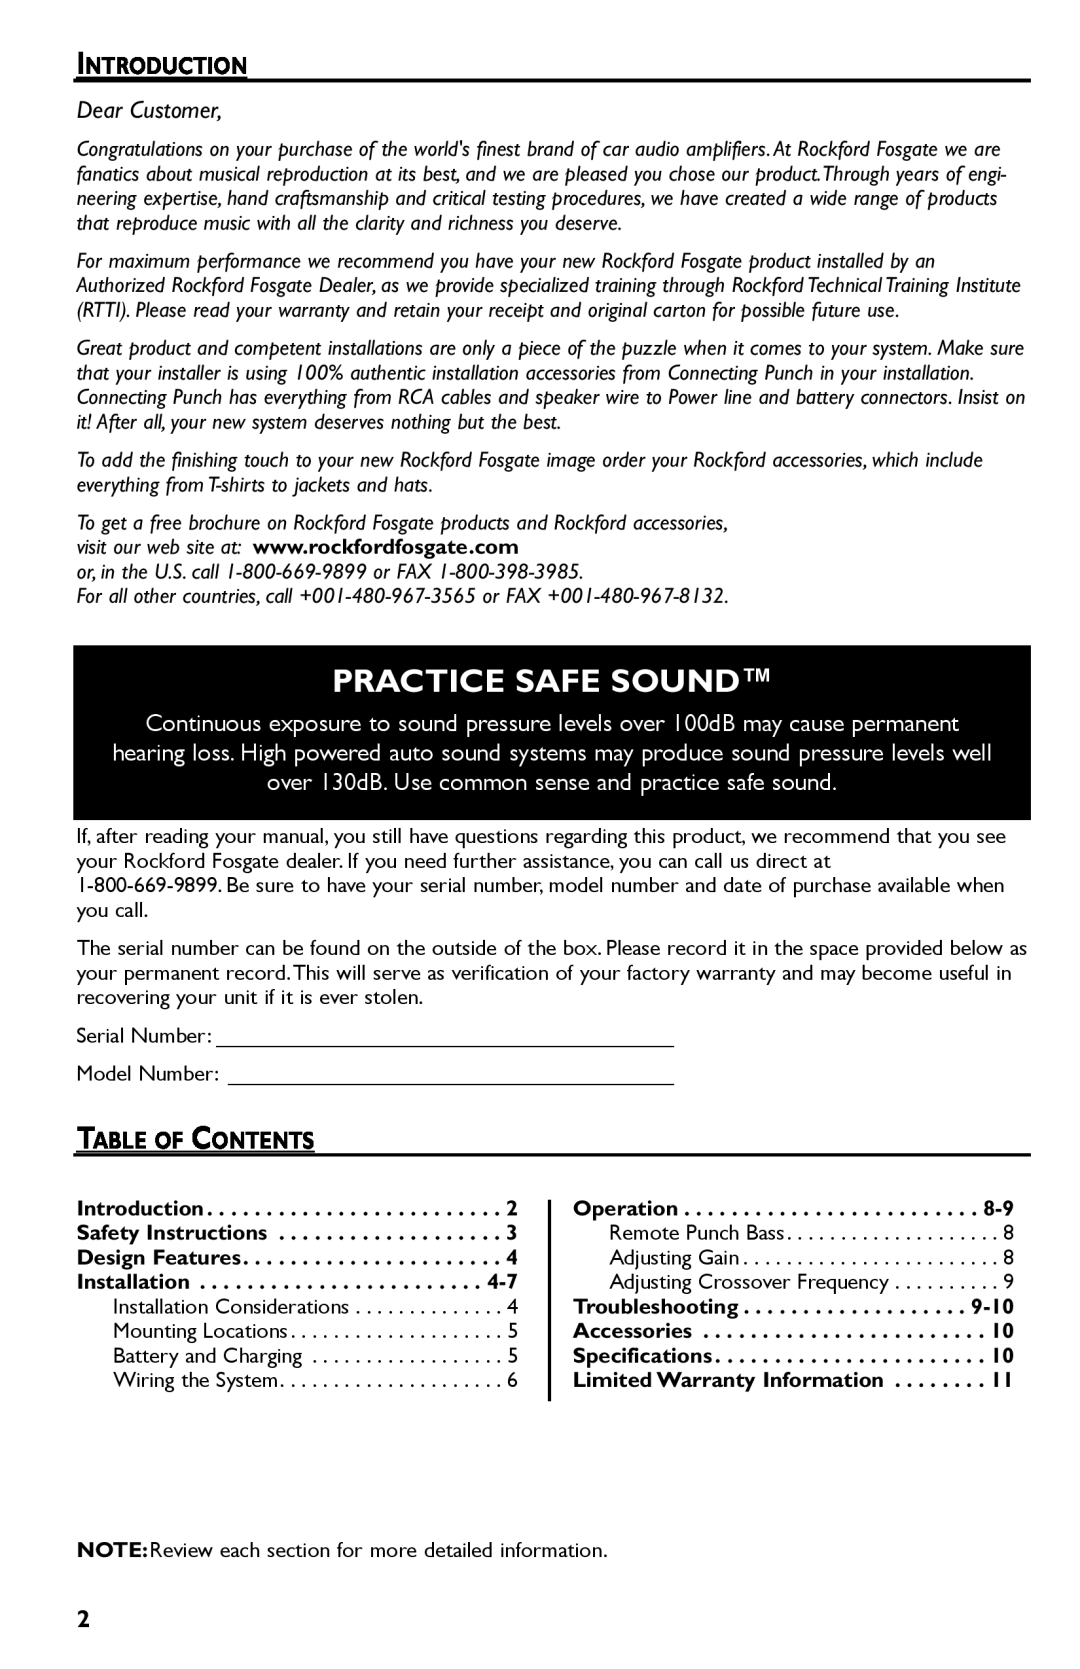 Rockford Fosgate Punch 45 manual Practice Safe Sound, Introduction, Table Of Contents 